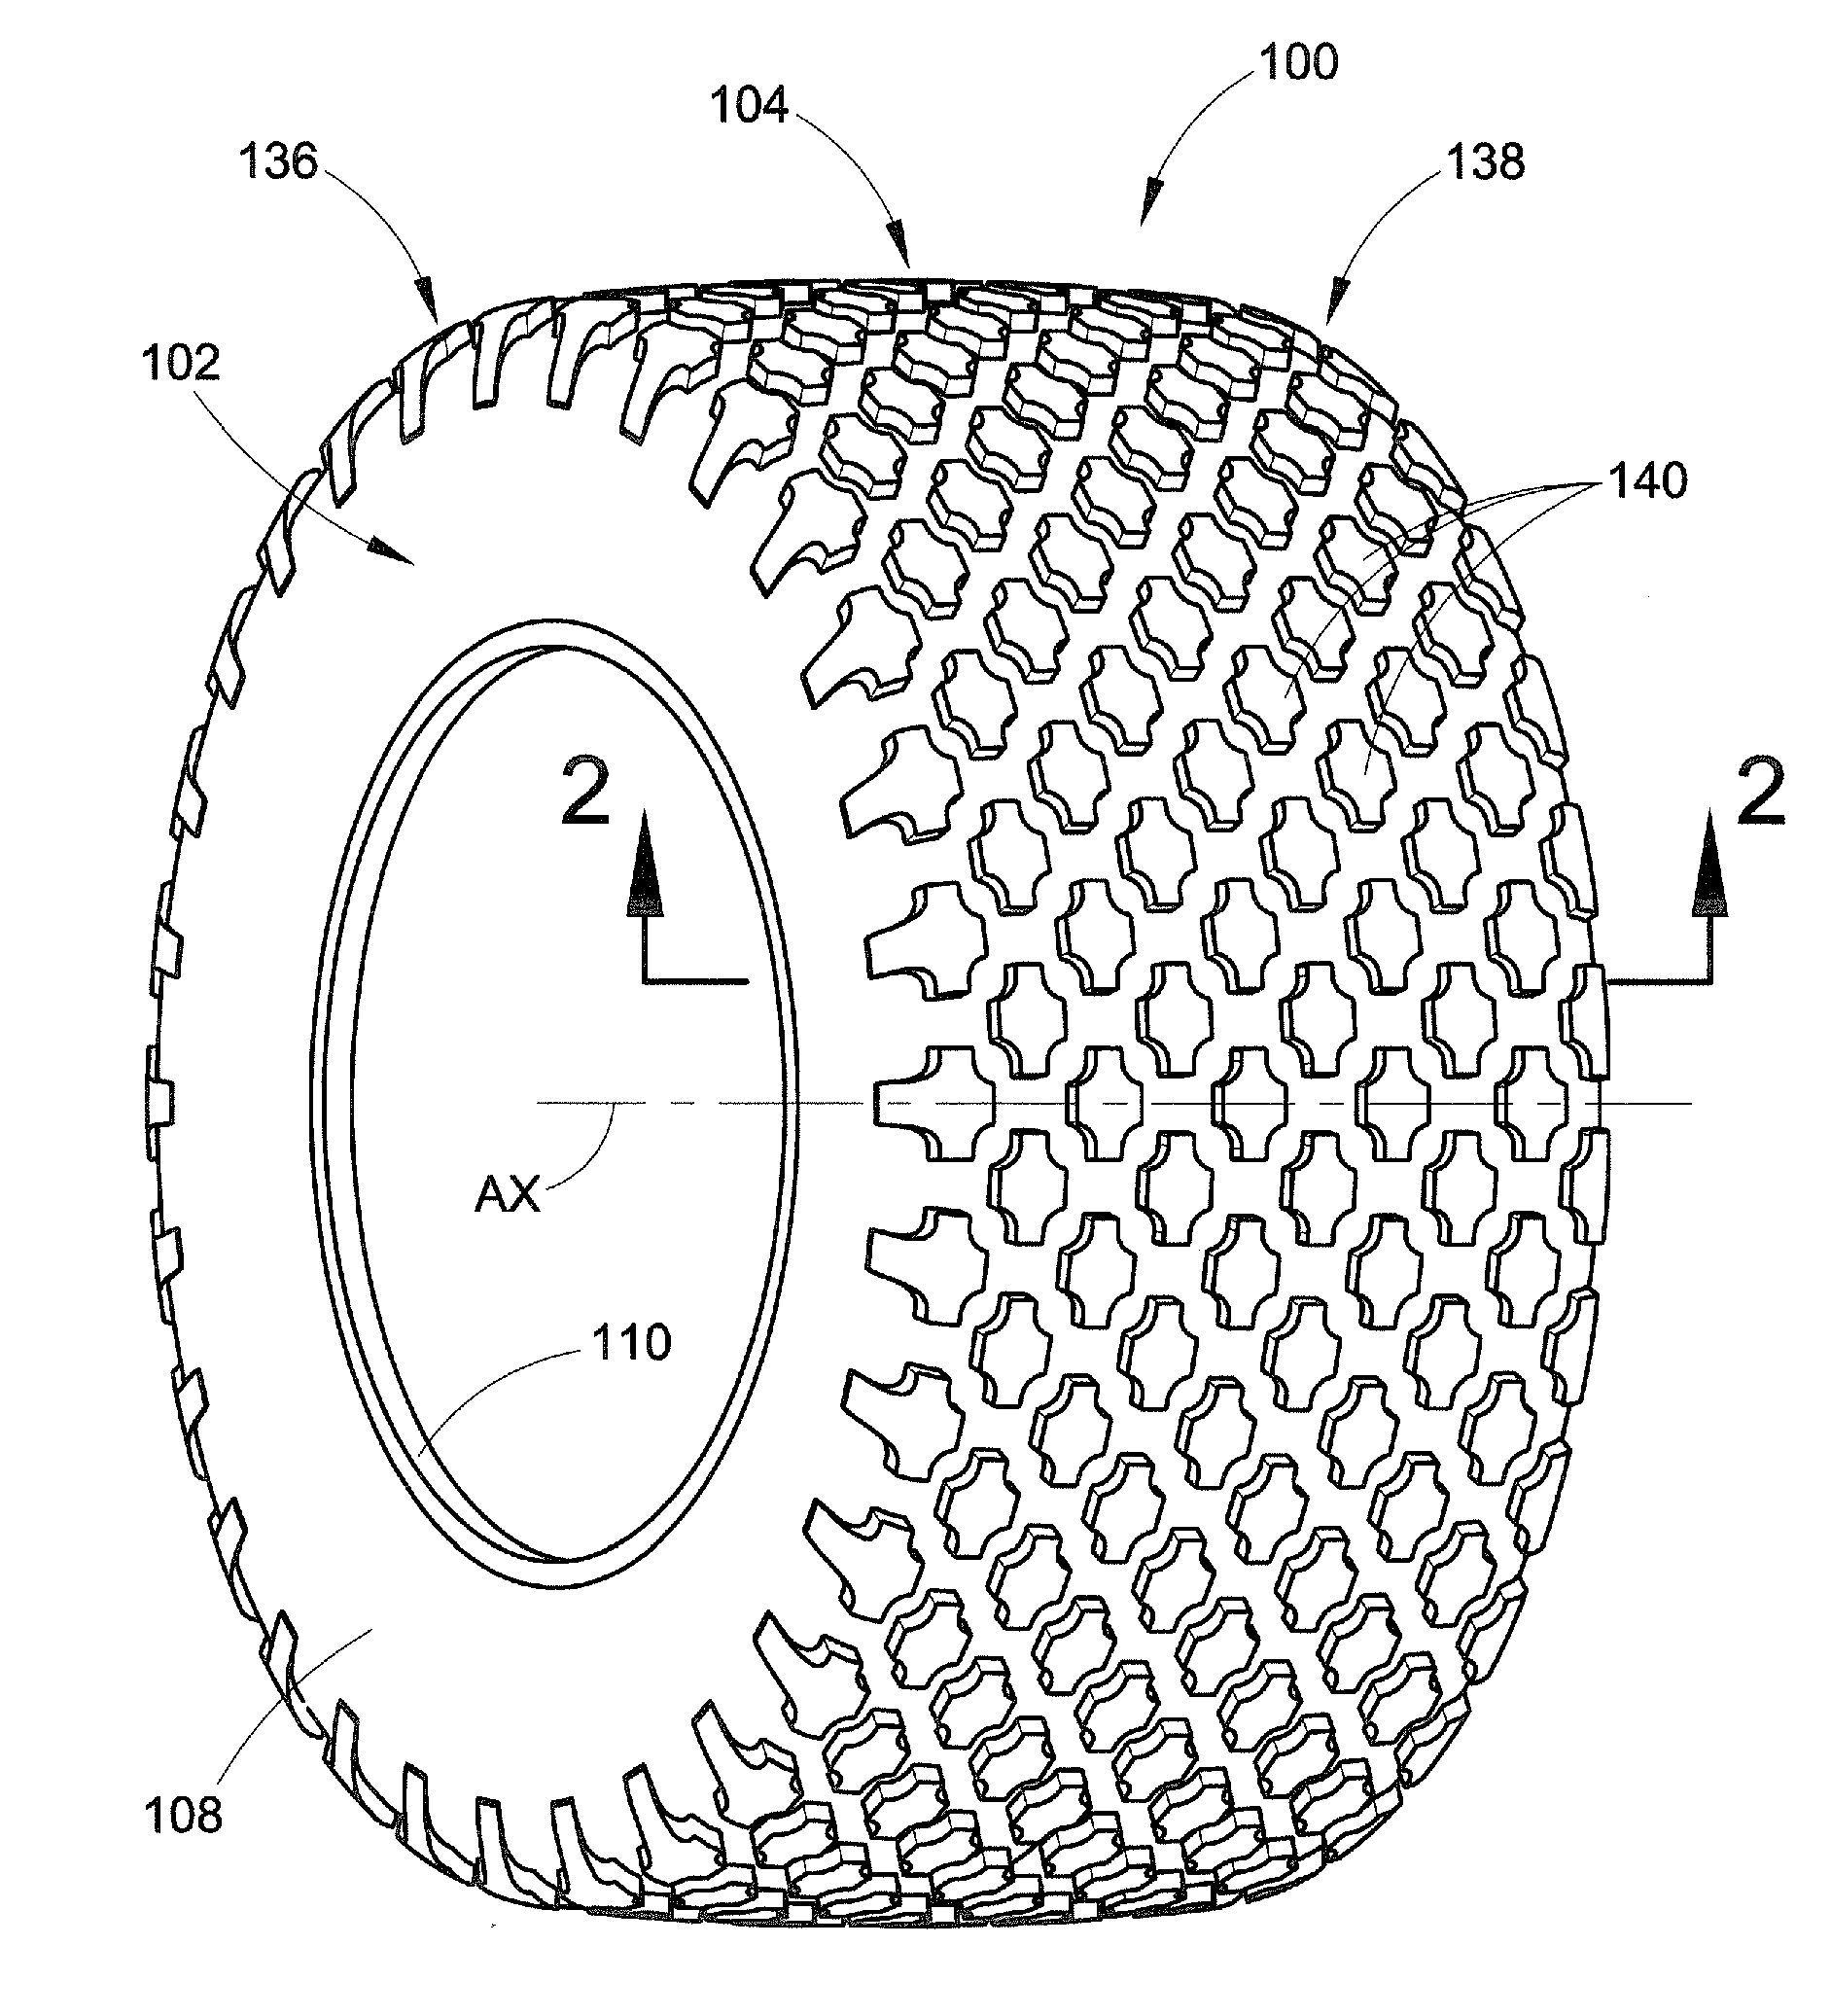 Tire with noise-reducing tread pattern